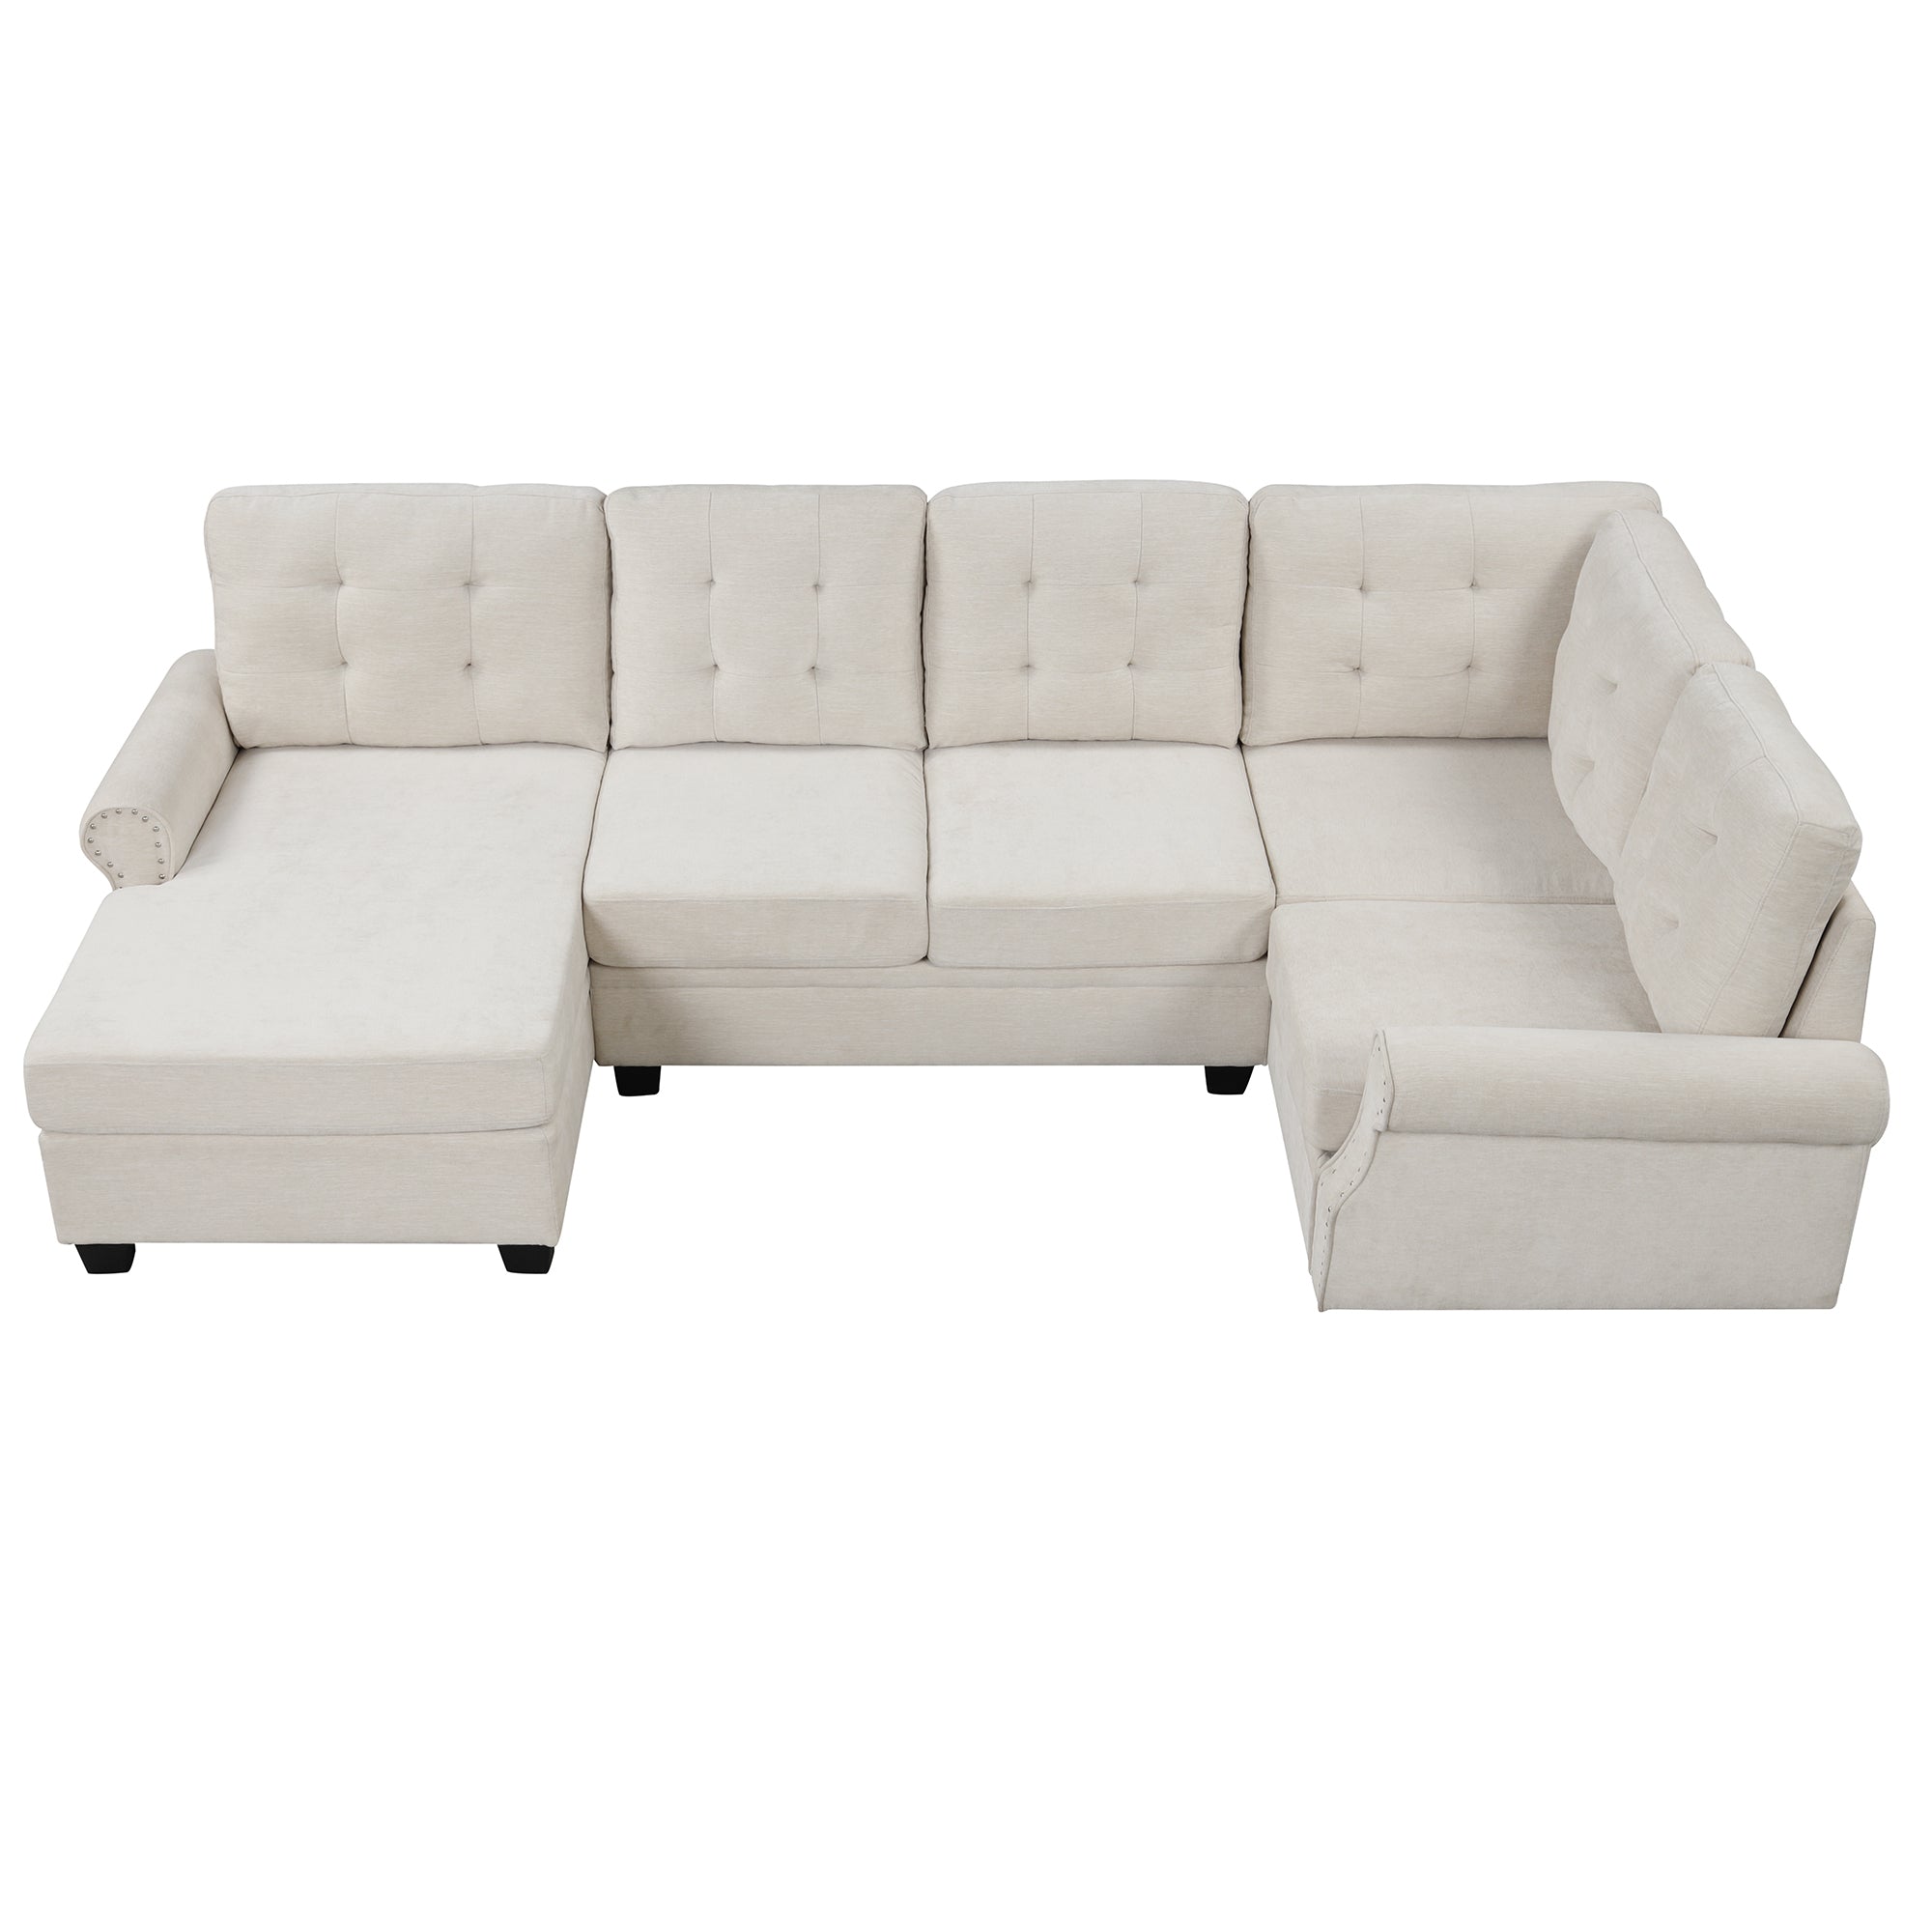 120" U-Shaped Sectional Sofa | Beige Linen Fabric Sofa-Stationary Sectionals-American Furniture Outlet